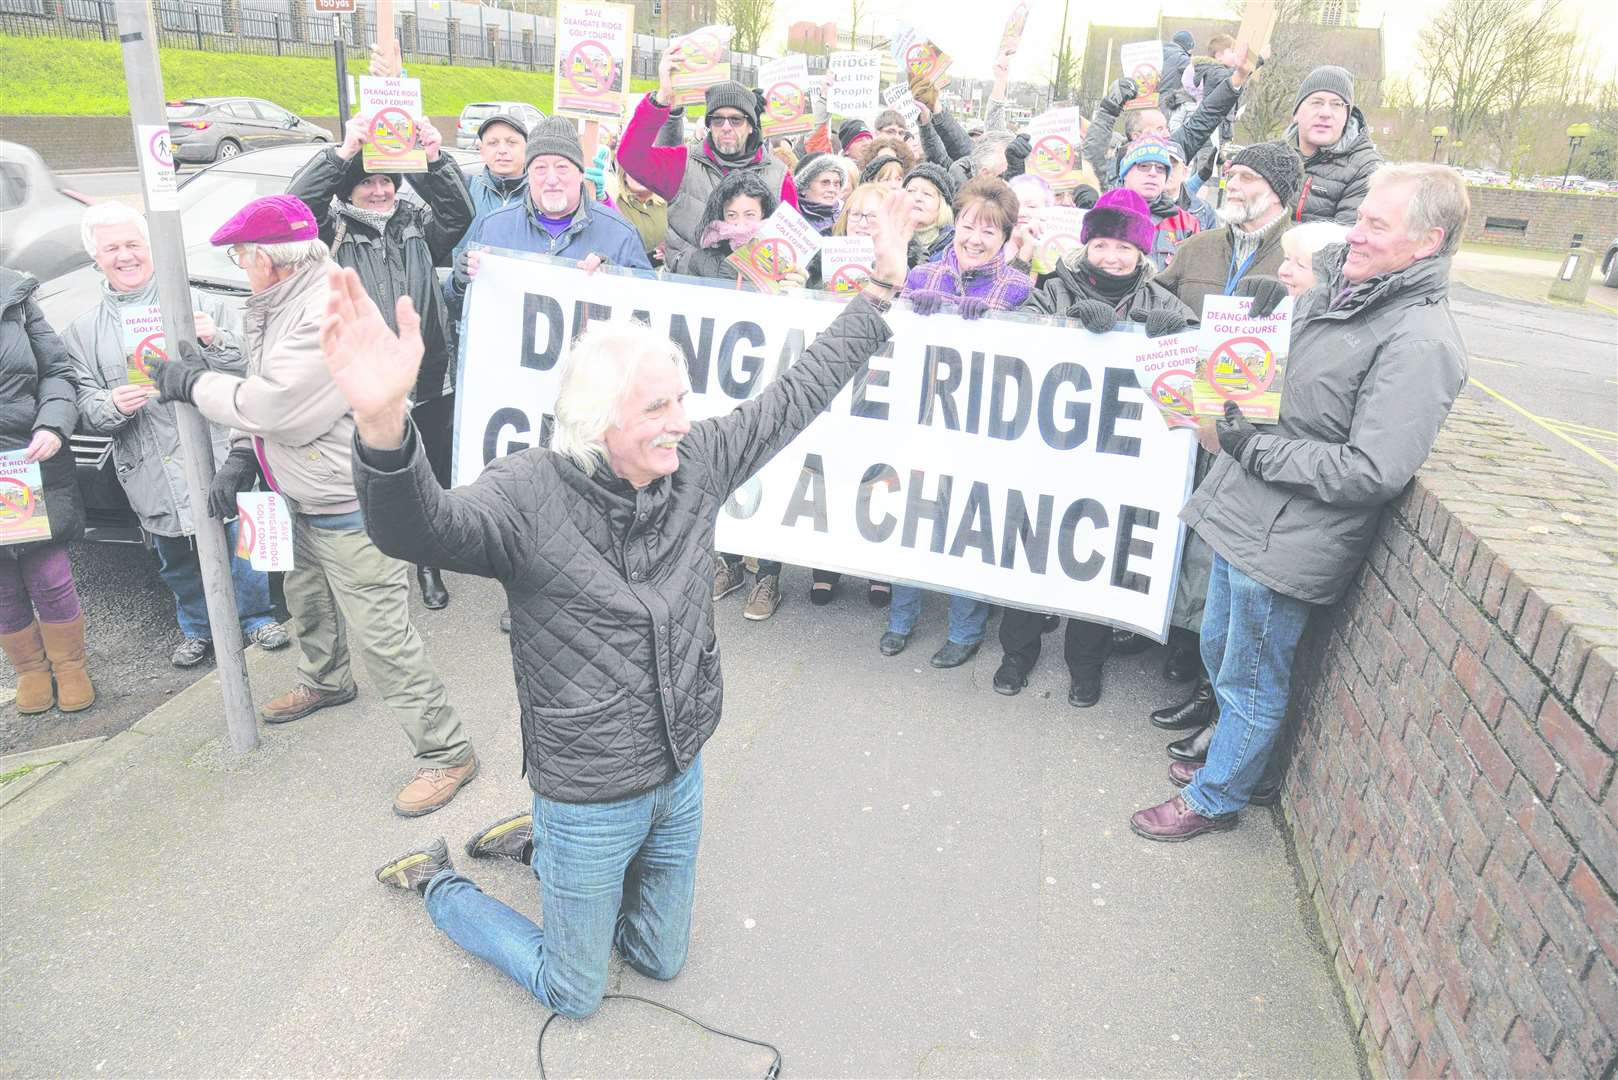 George Crozer leads the protest against the closure of Deangate Ridge Golf Course outside the Medway Council offices in Gun Wharf back in 2018. Picture: Chris Davey